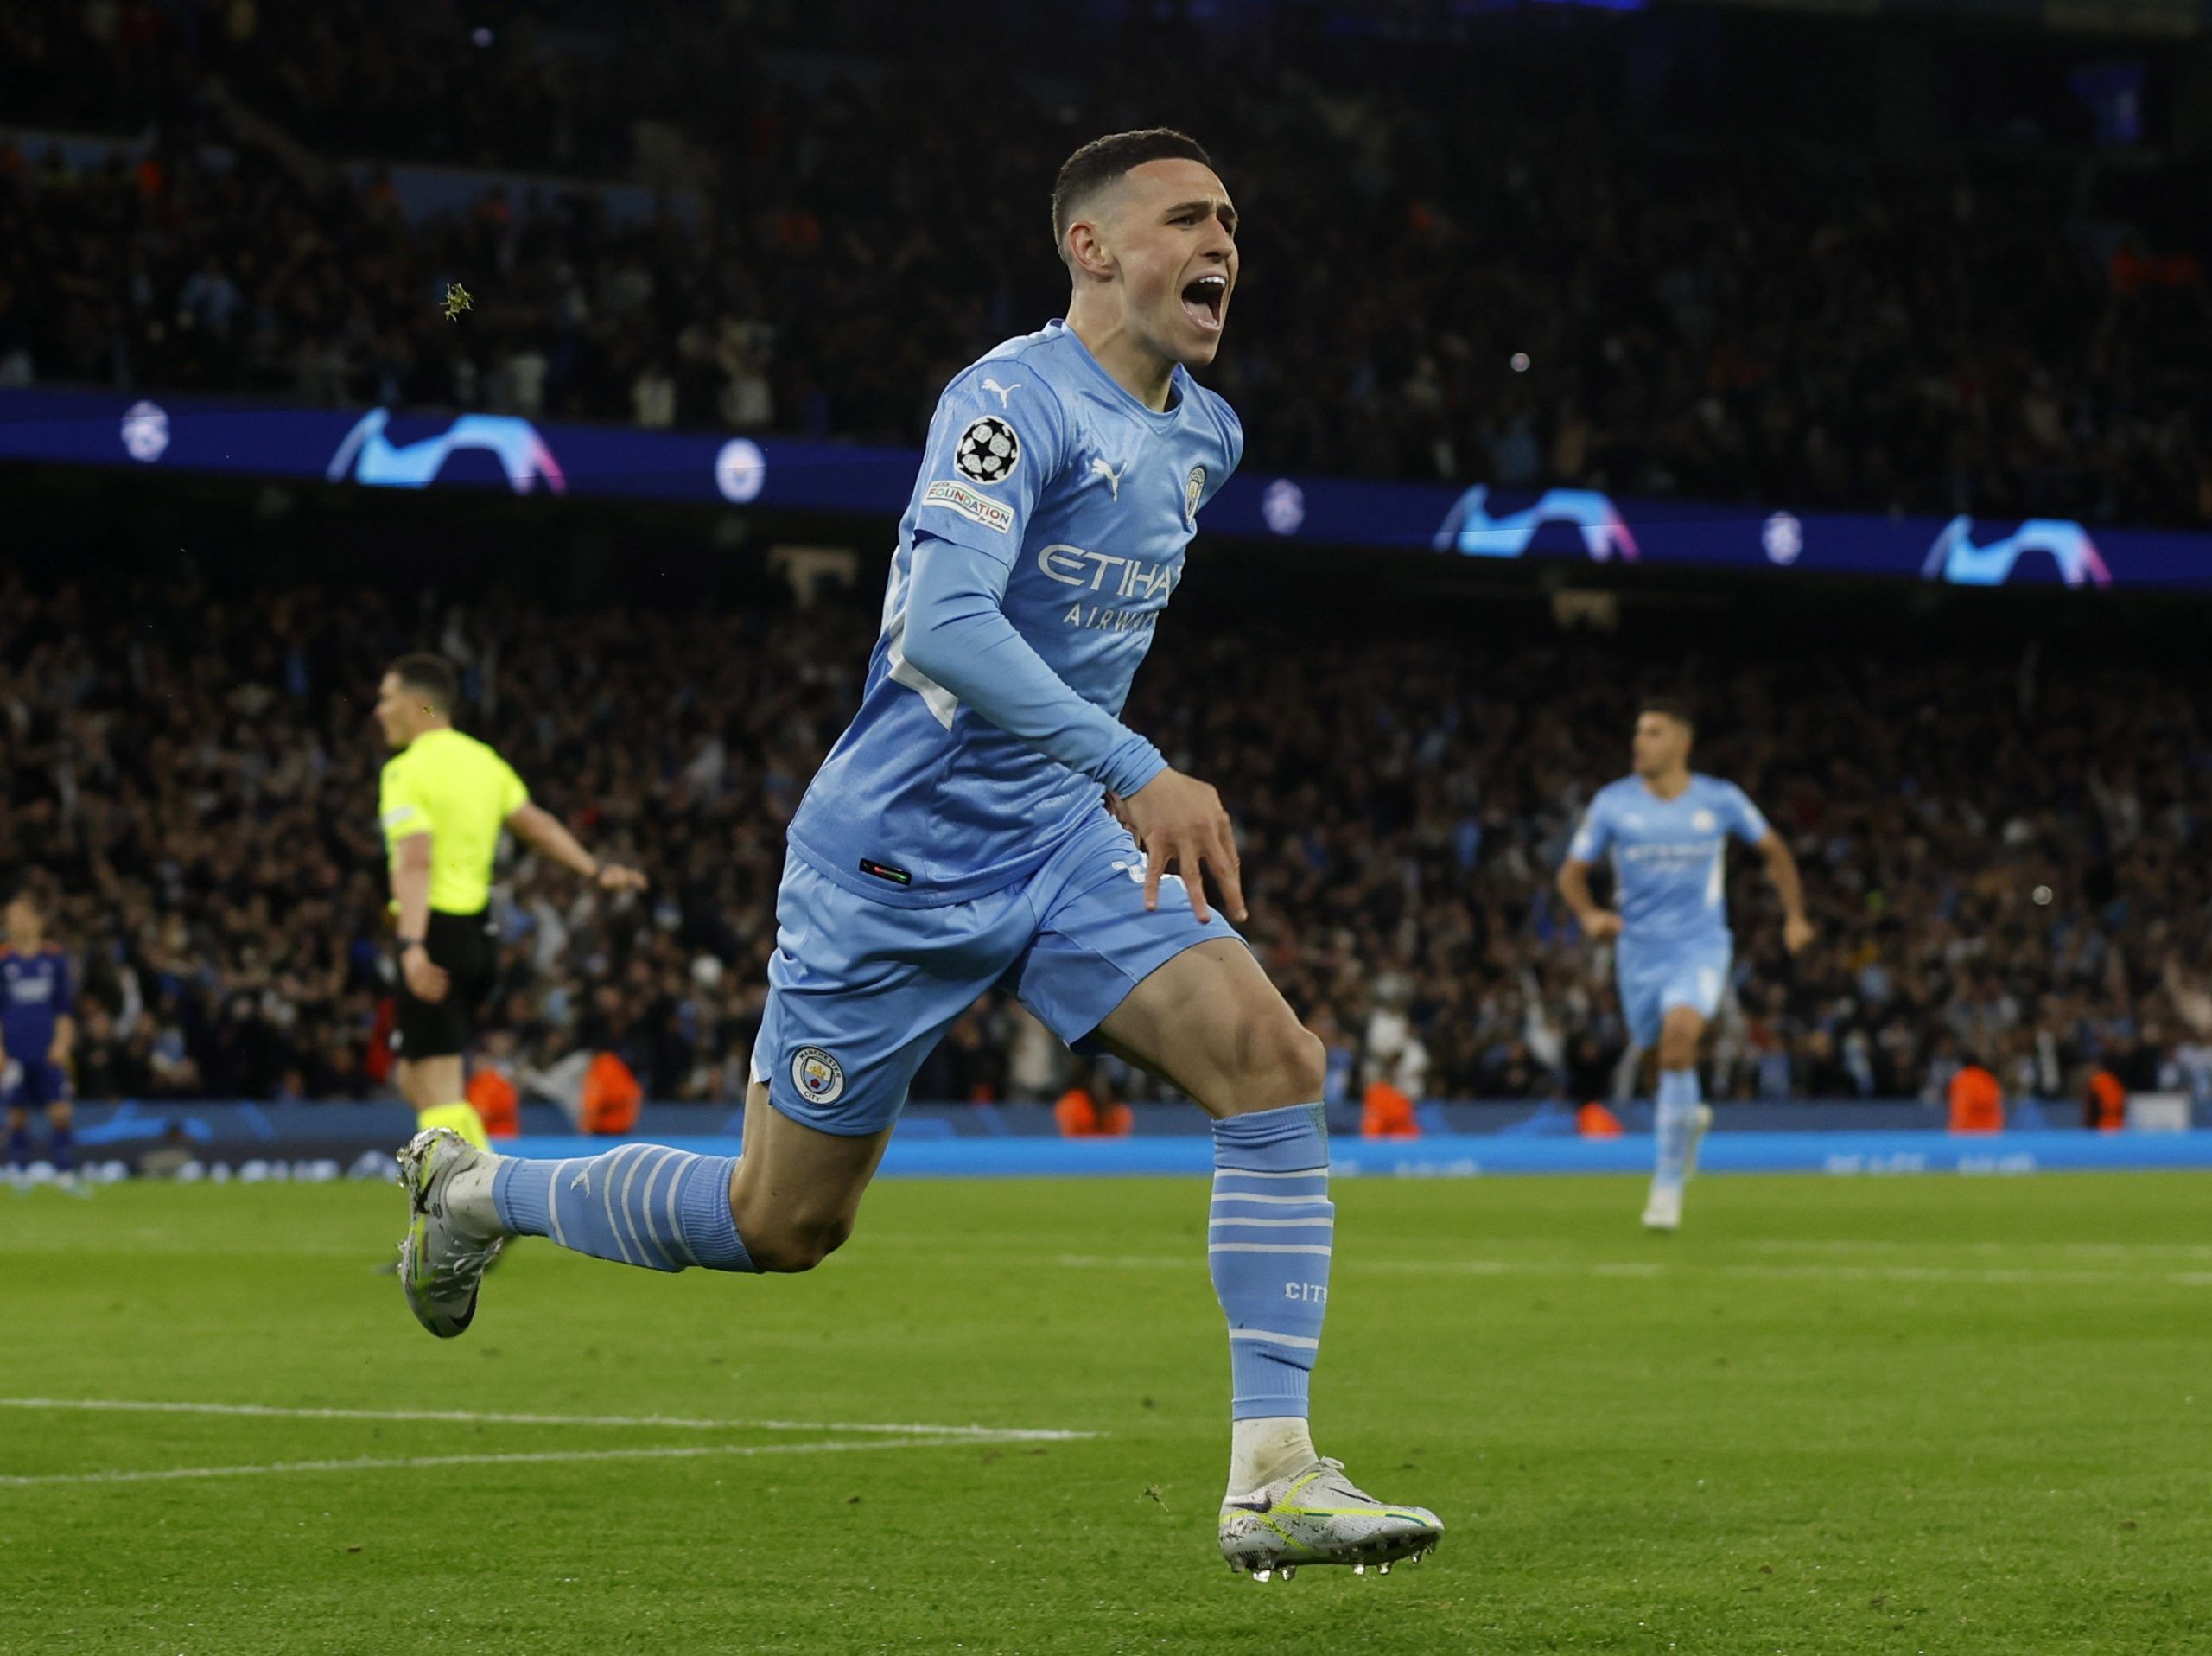 Manchester City: Daily Mail journalist shares ‘great’ Foden news -Manchester City Transfer Rumours